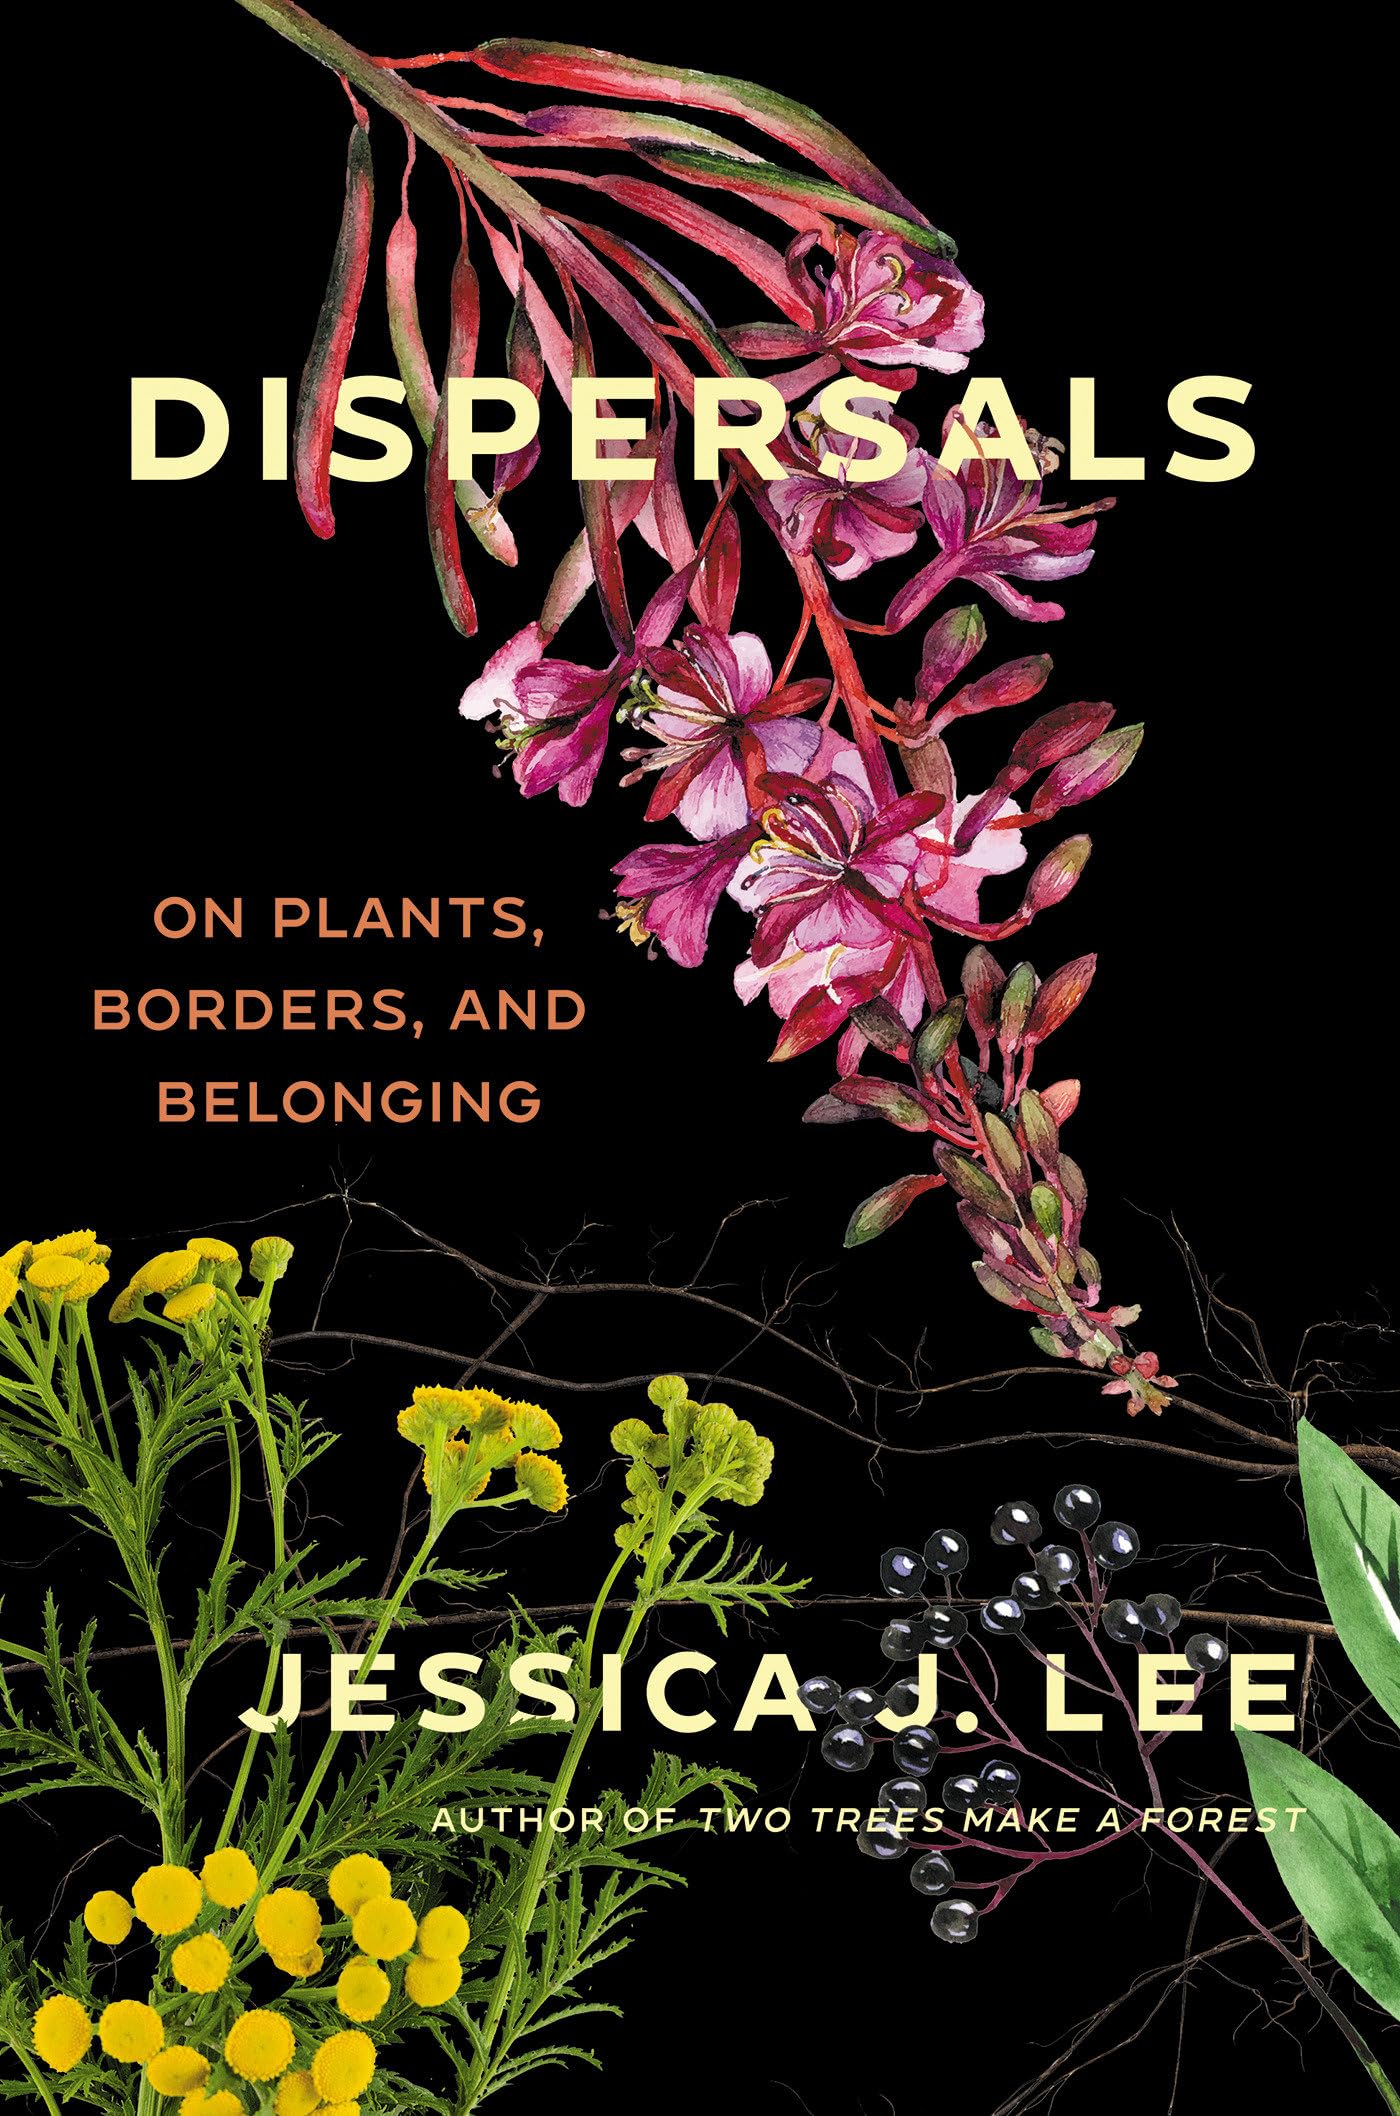 The cover of Jessica J. Lee's DISPERSALS shows pink and yellow wildflower sprigs against a black background.